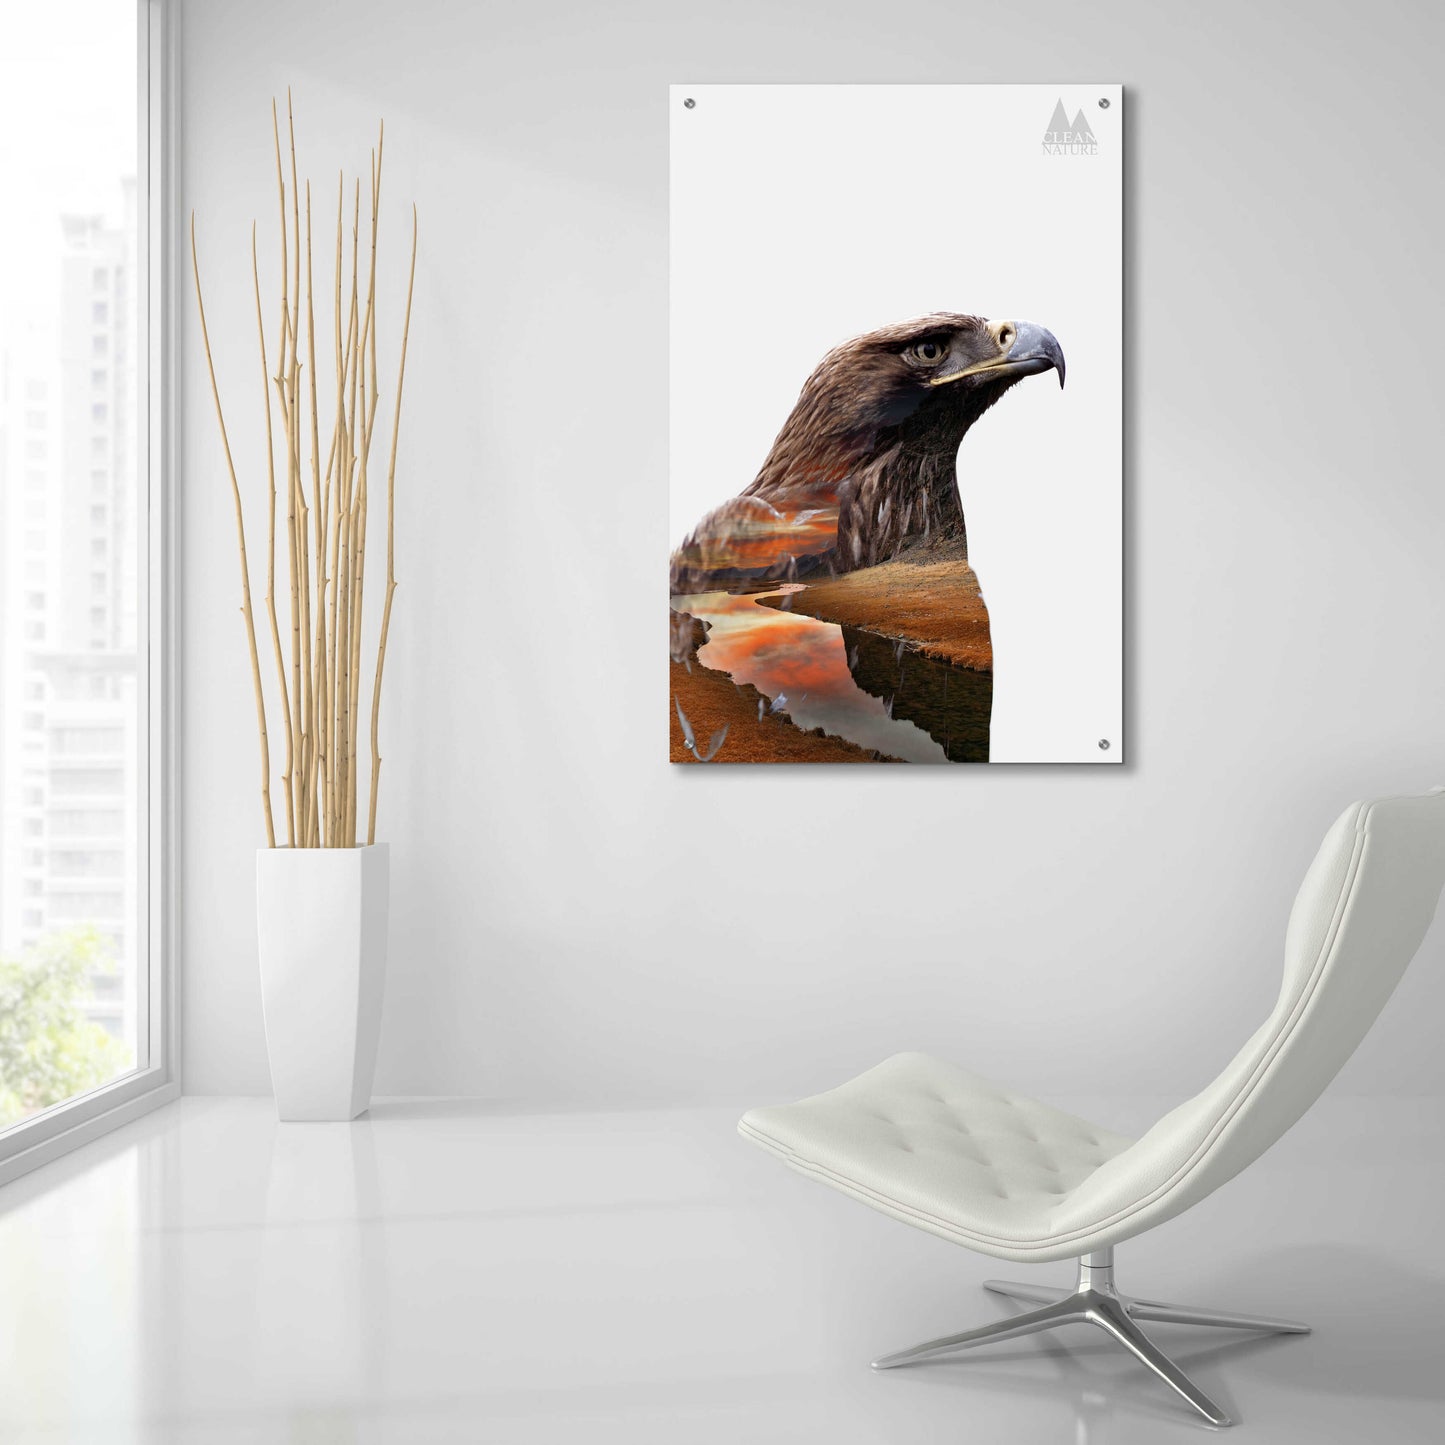 Epic Art 'Eagle' by Clean Nature, Acrylic Glass Wall Art,24x36